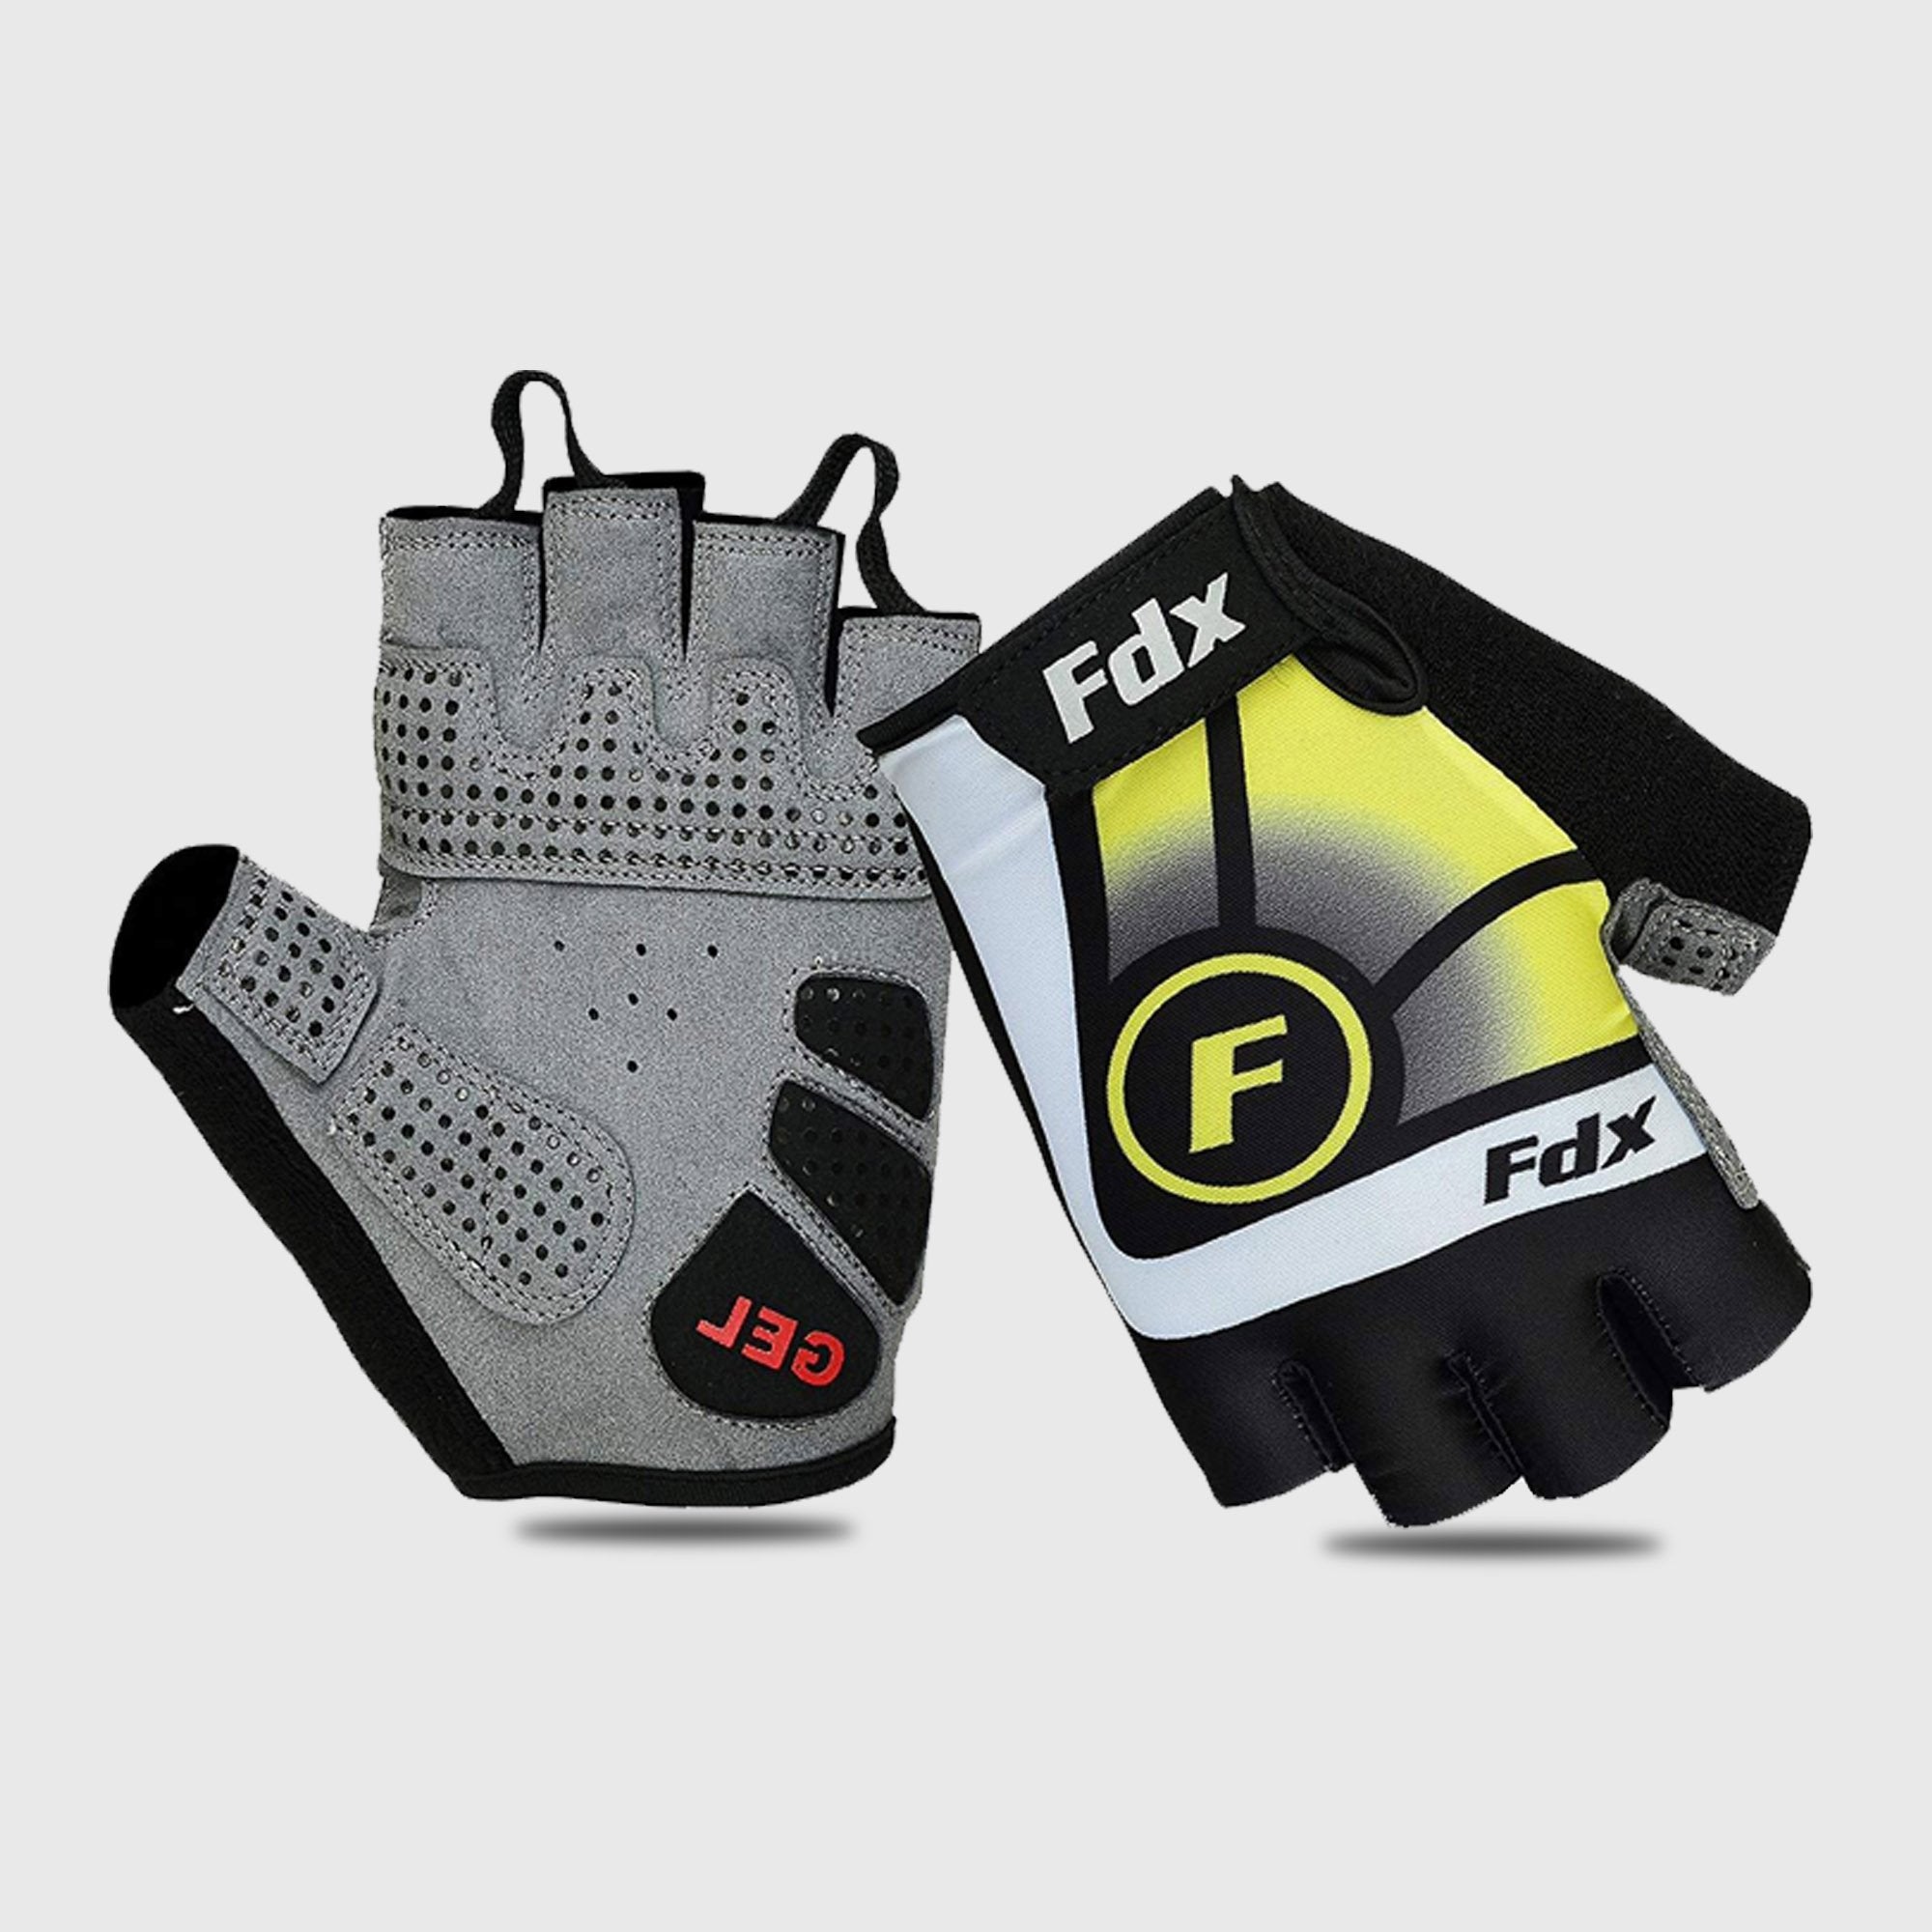 Fdx Signature Yellow Gel Padded Short Finger Summer Cycling Gloves